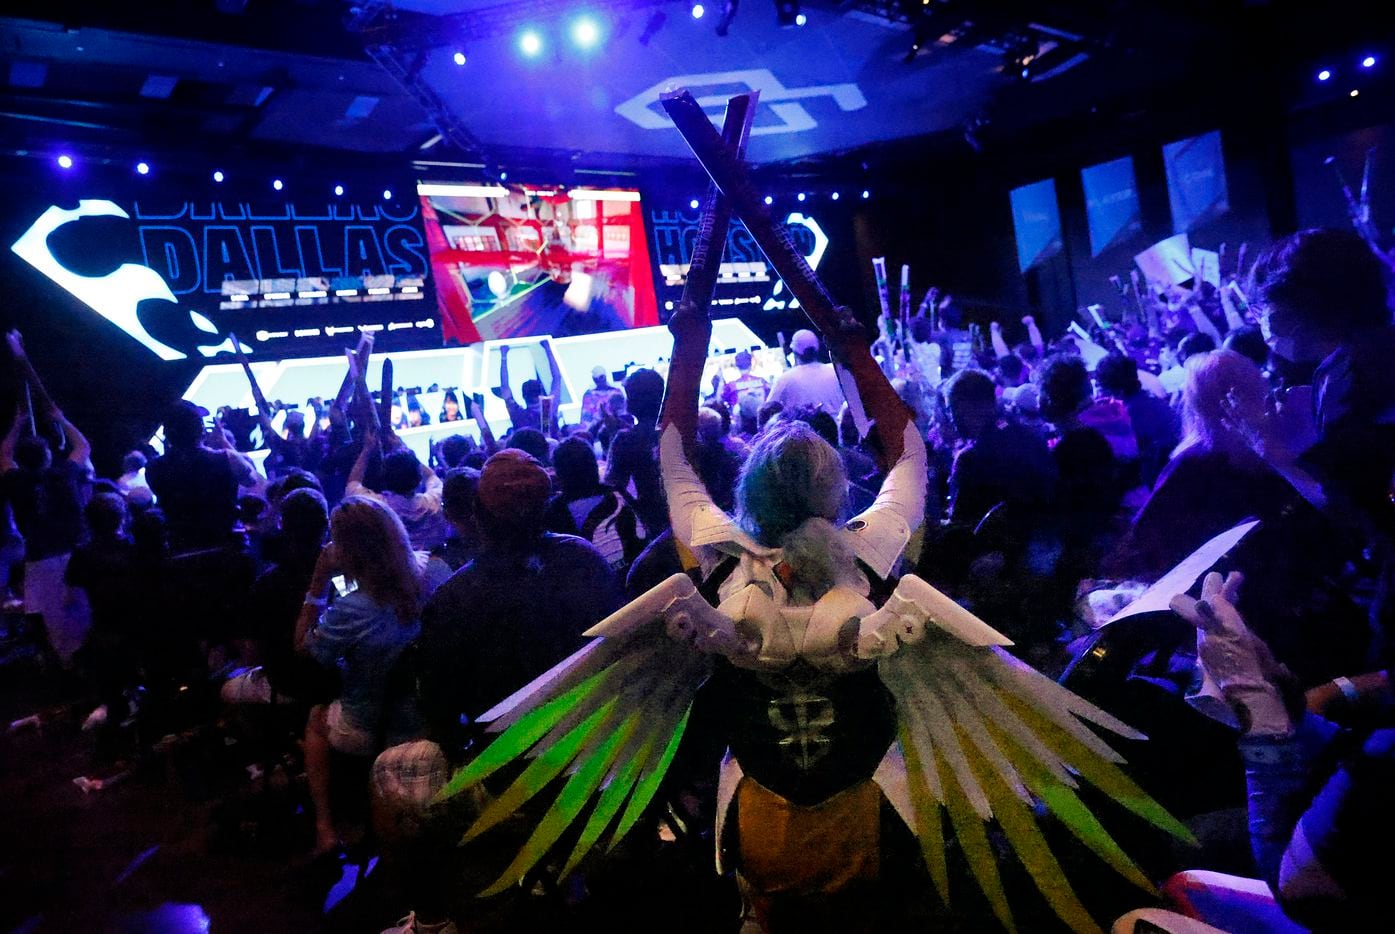 Dallas Fuel fan Hope Hopkins of Alvarado, Texas came dressed as Mercy, a character from Overwatch League. She another fans cheered as the Fuel won a map during their match against the Houston Outlaws at Esports Stadium Arlington Friday, July 9, 2021. Dallas Fuel defeated Houston in The Battle for Texas, 3-0. It was the first in-person live competition for fans in over a year. Houston competed from their hometown. (Tom Fox/The Dallas Morning News)